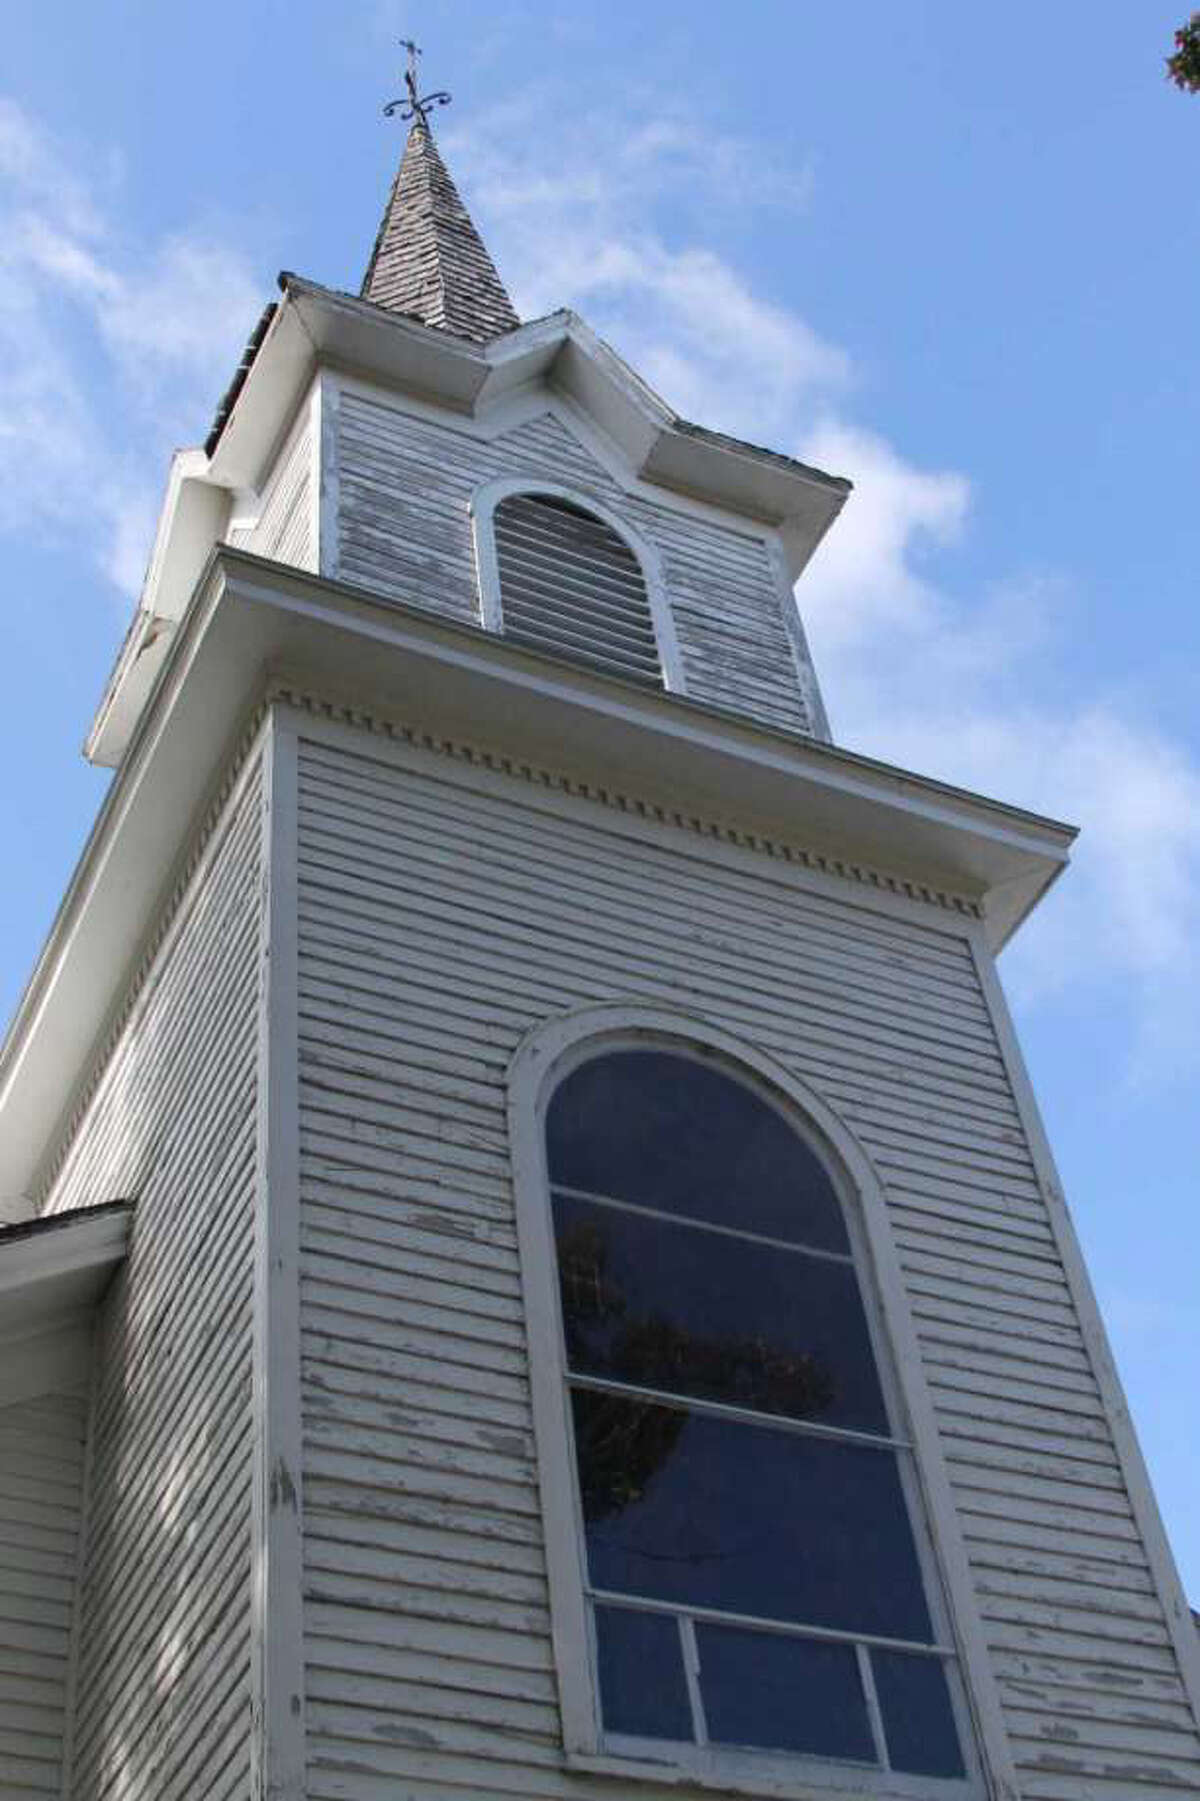 Our Savior's Historic Society members hope to have the historic Old Kirke museum fully repainted this year. Although the project is mostly complete, a work platform is needed to finish painting the steeple.